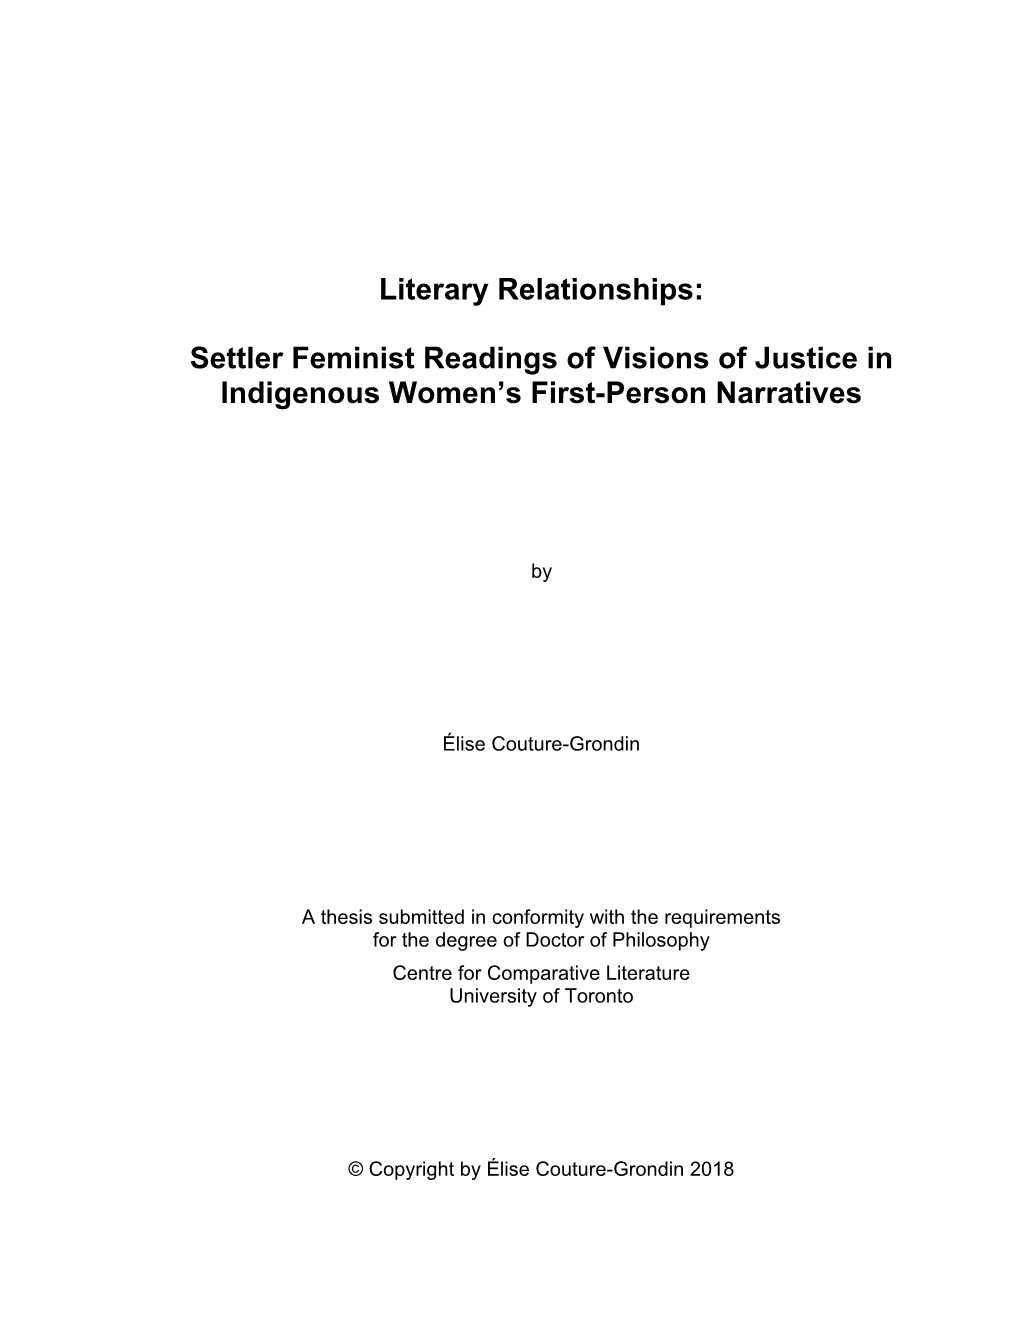 Literary Relationships: Settler Feminist Readings of Visions of Justice in Indigenous Women's First-Person Narratives